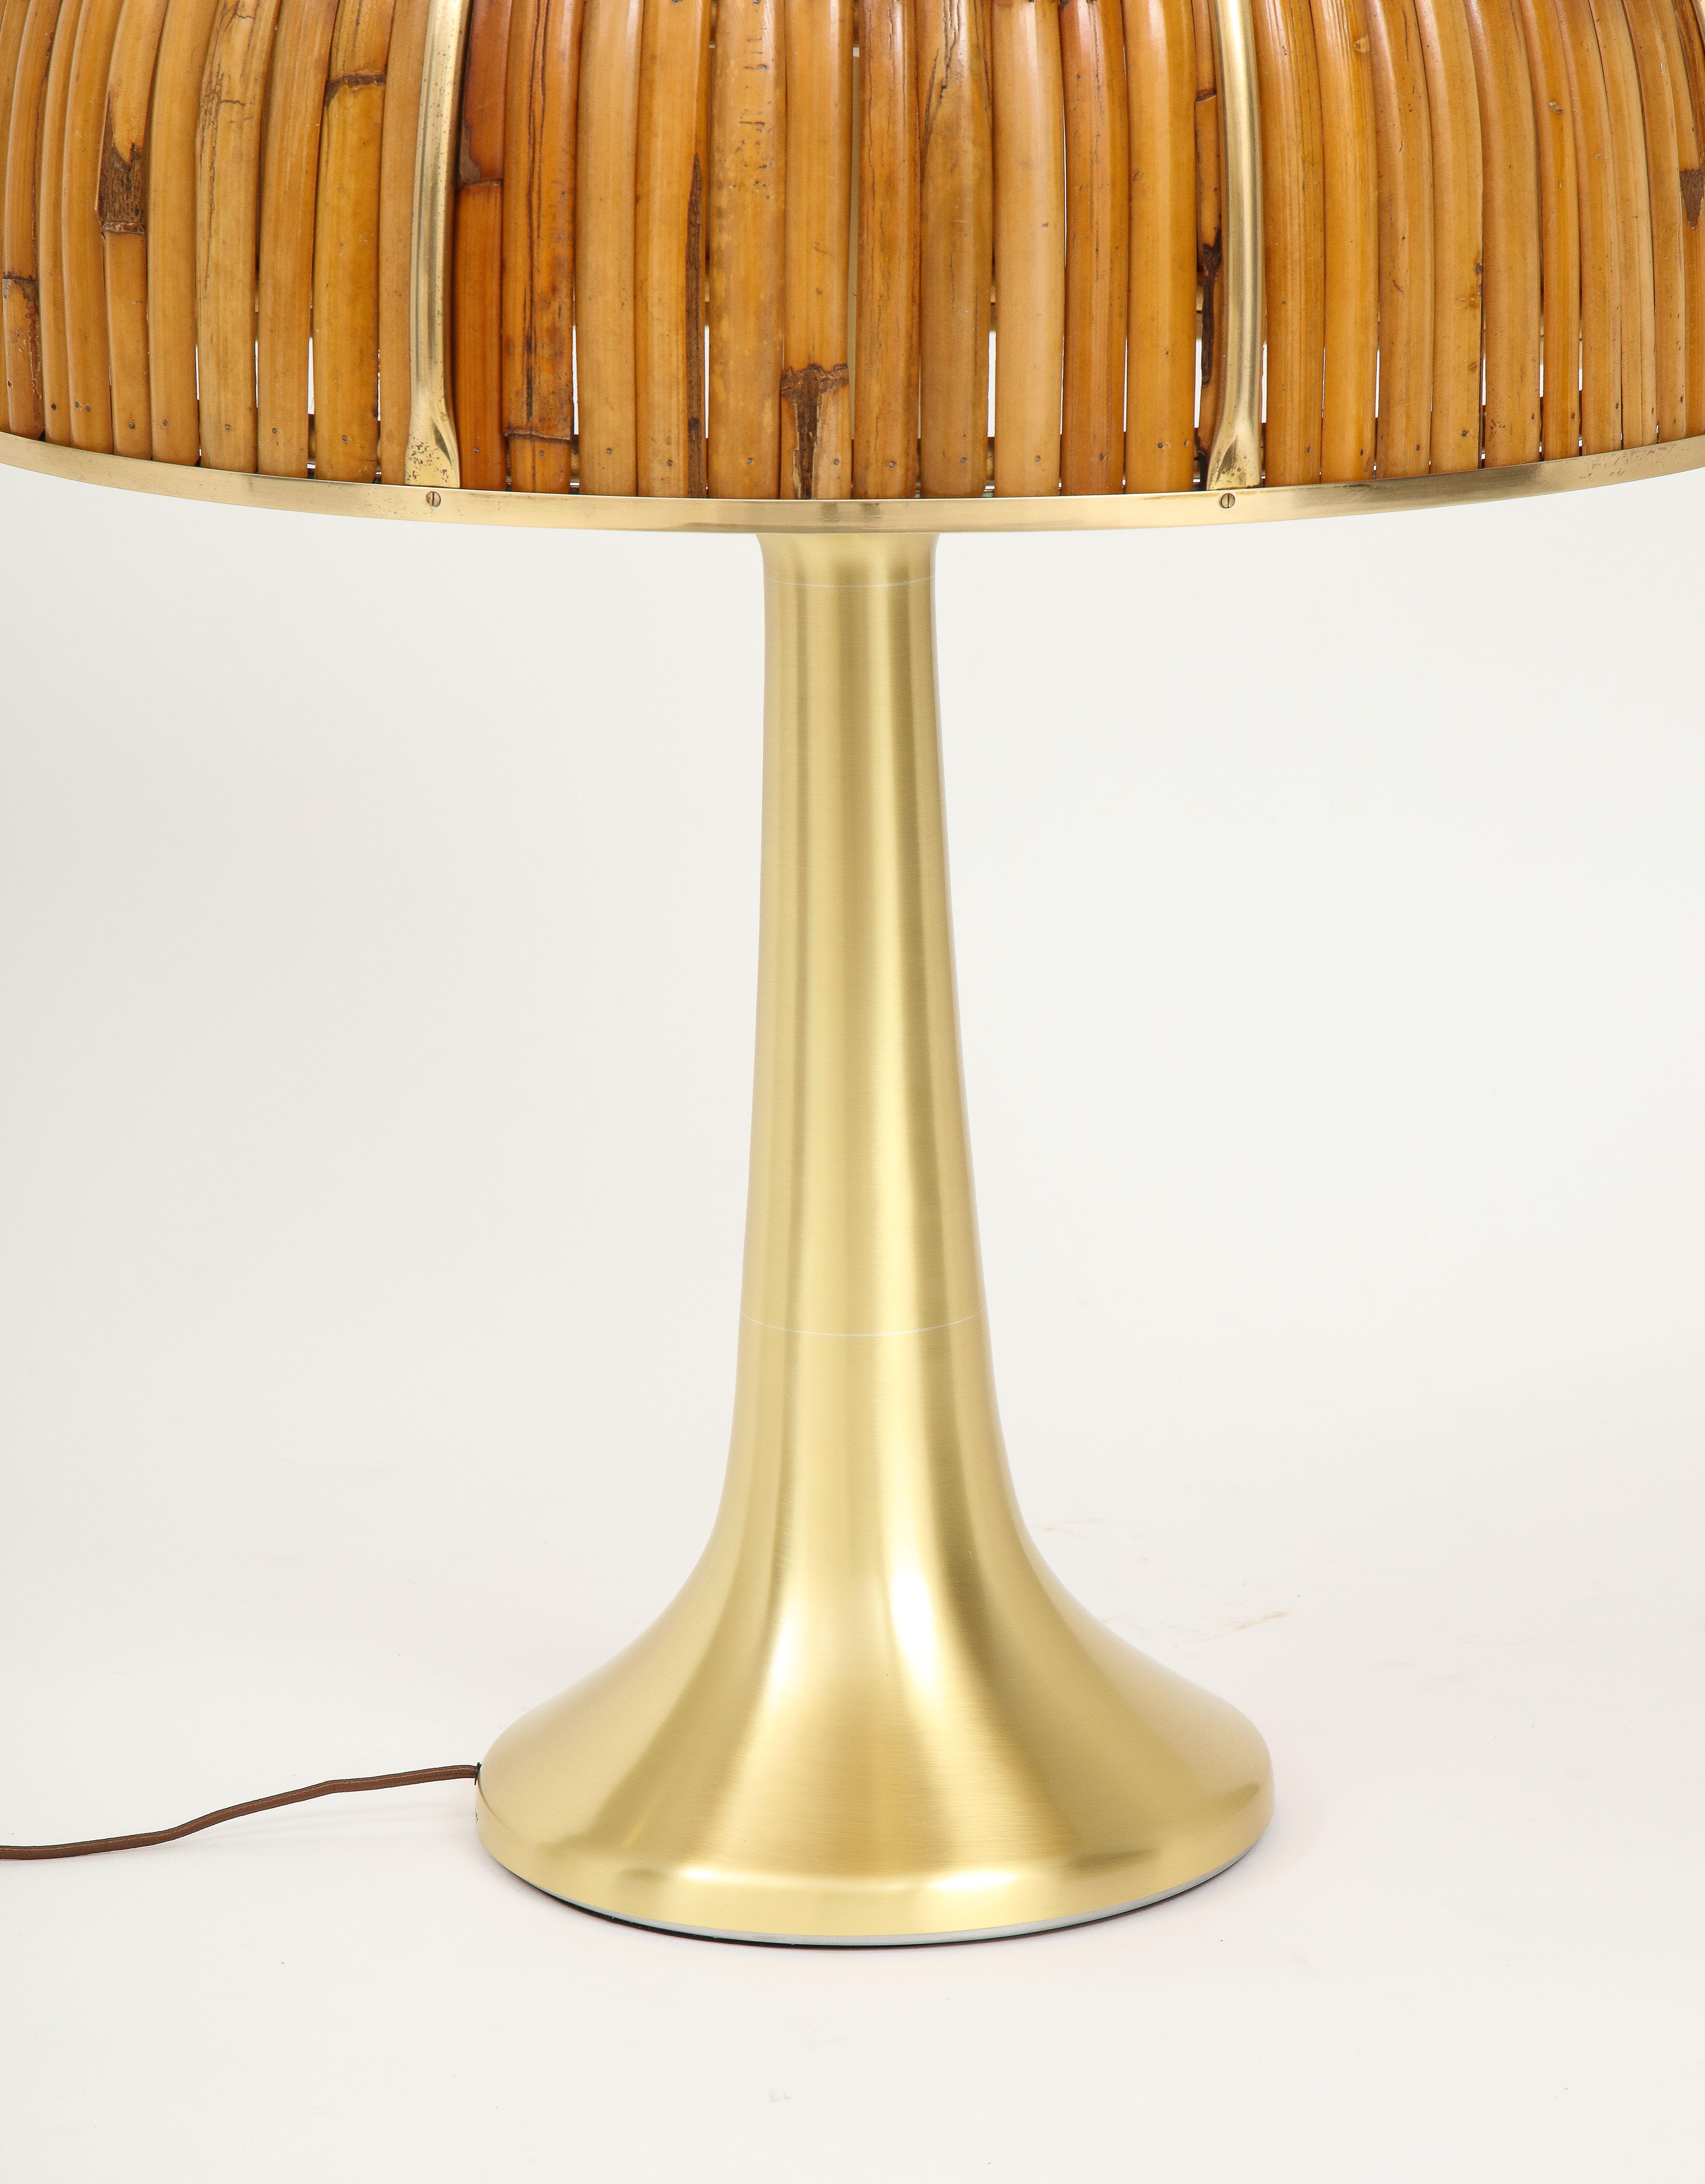 Gabriella Crespi Rare Large 'Fungo' Table Lamp in Bamboo and Brass, Italy, 1970s 4